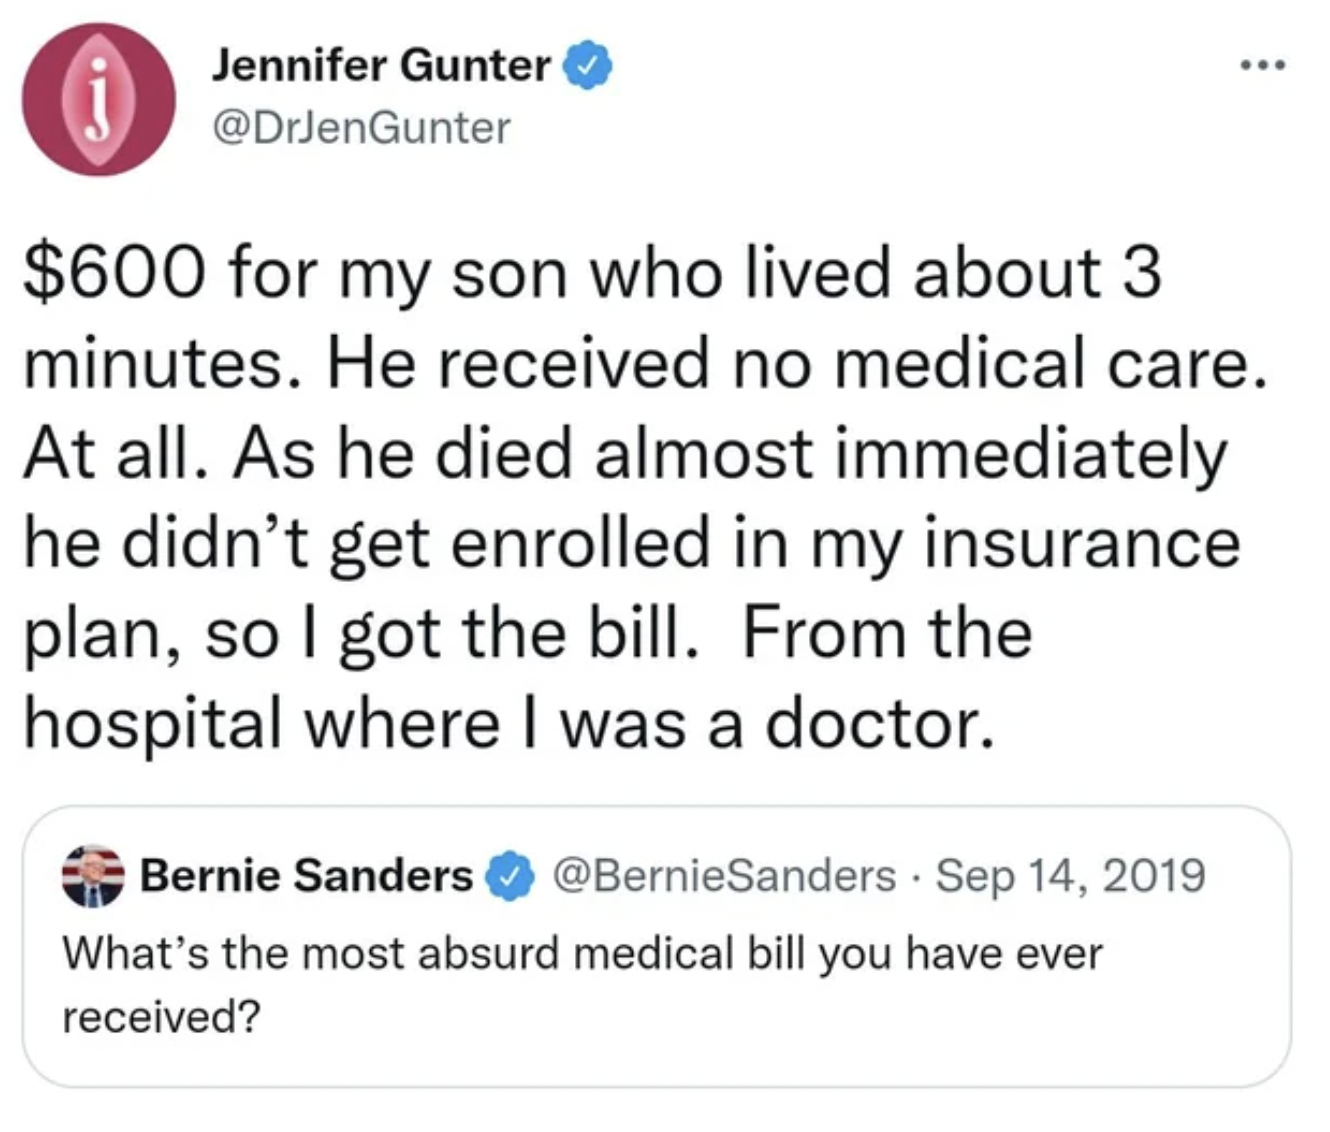 document - $600 for my son who lived about 3 minutes. He received no medical care. At all. As he died almost immediately he didn't get enrolled in my insurance plan, so I got the bill. From the hospital where I was a doctor. Bernie Sanders